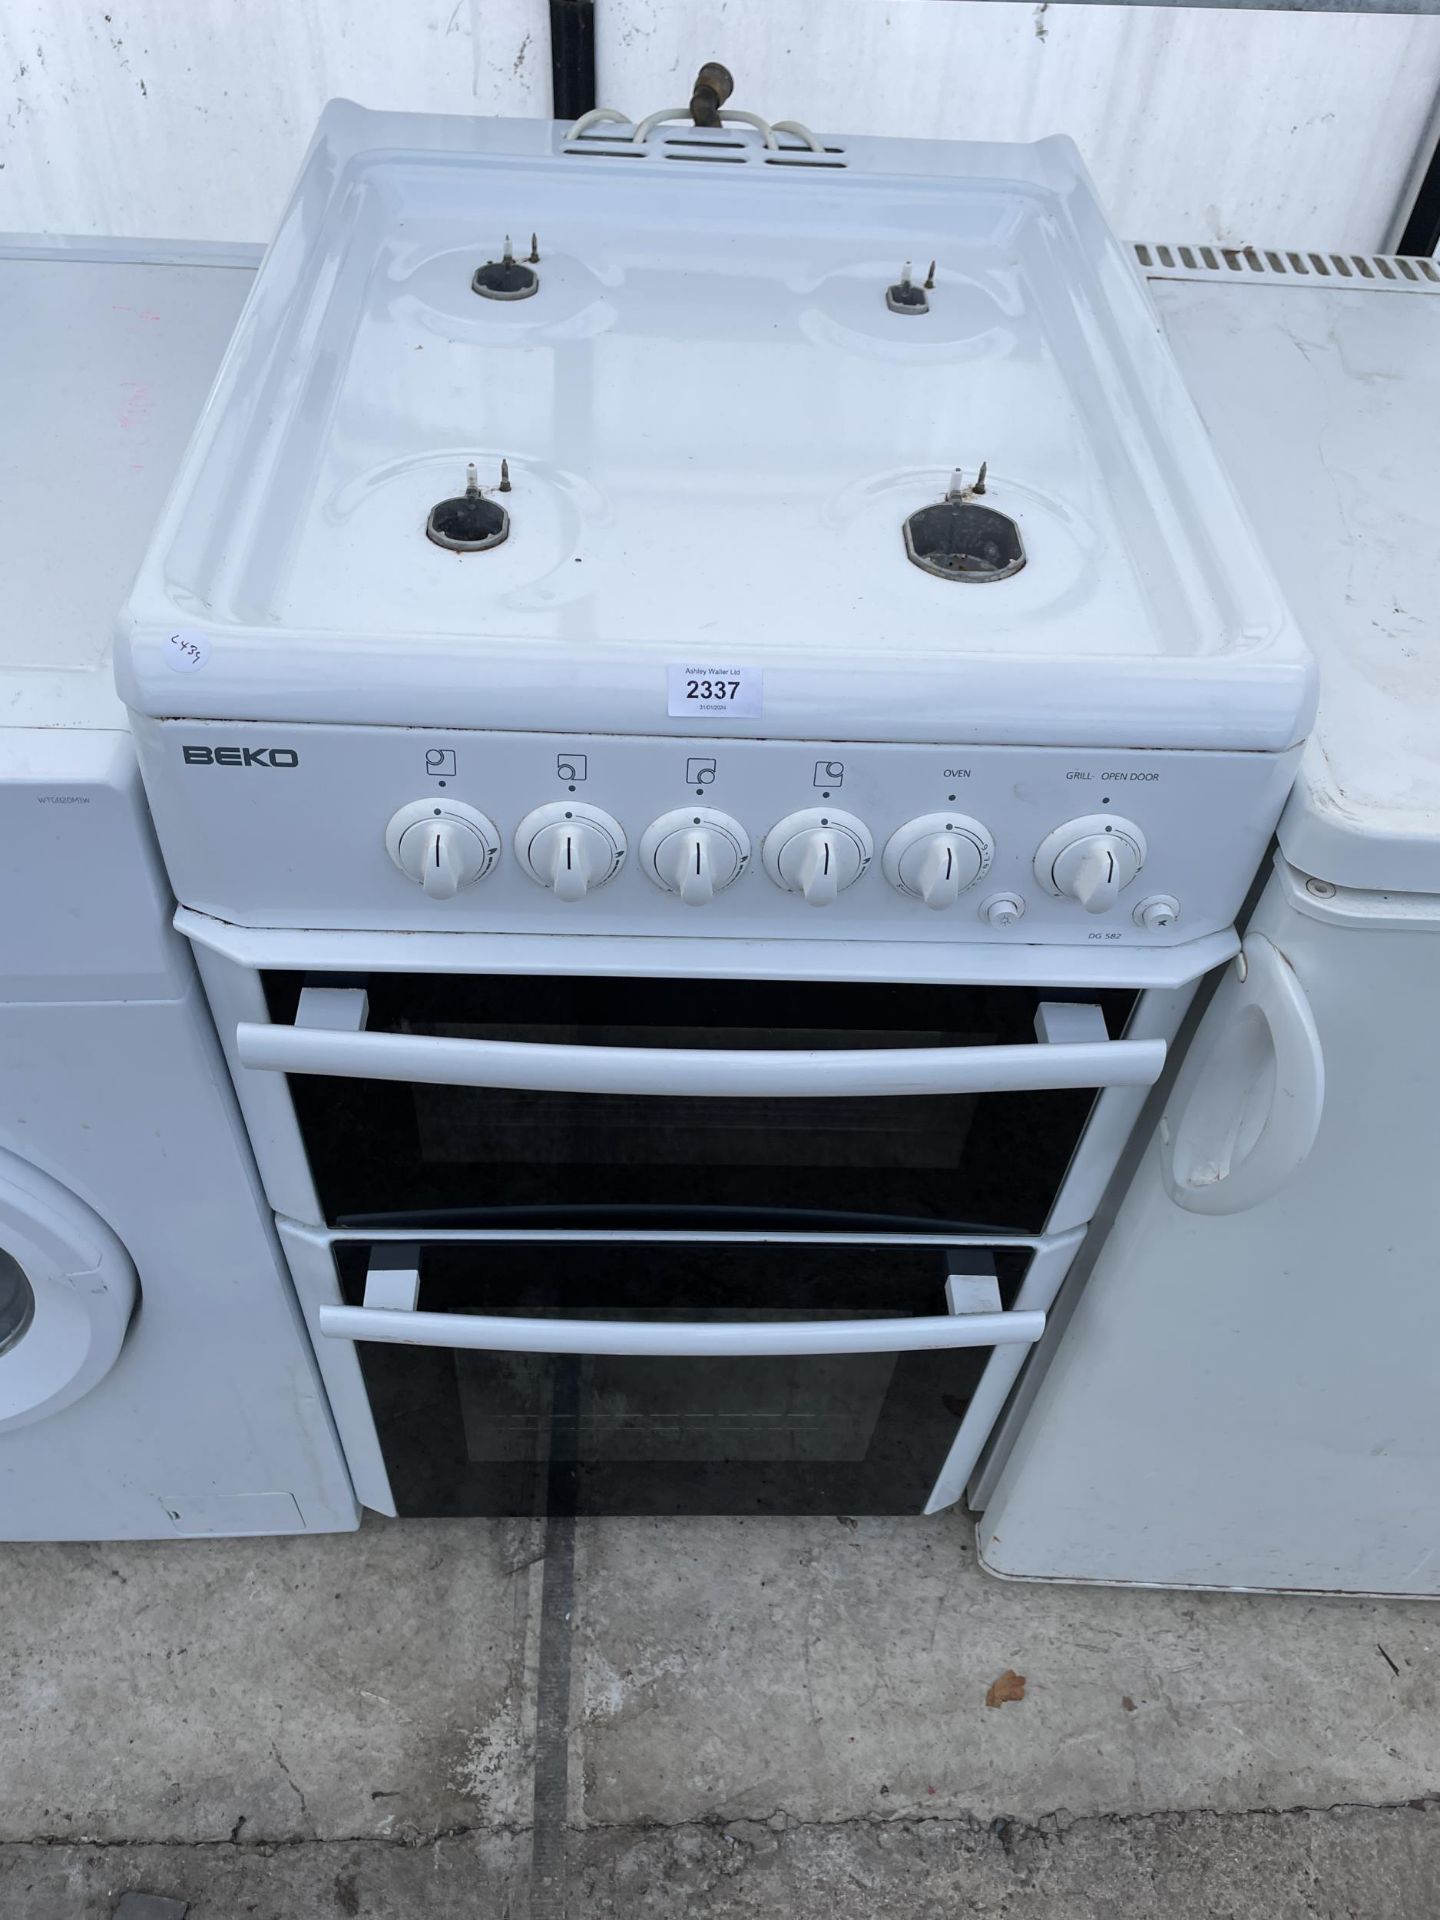 A WHITE AND BLACK FREESTANDING GAS OVEN AND HOB